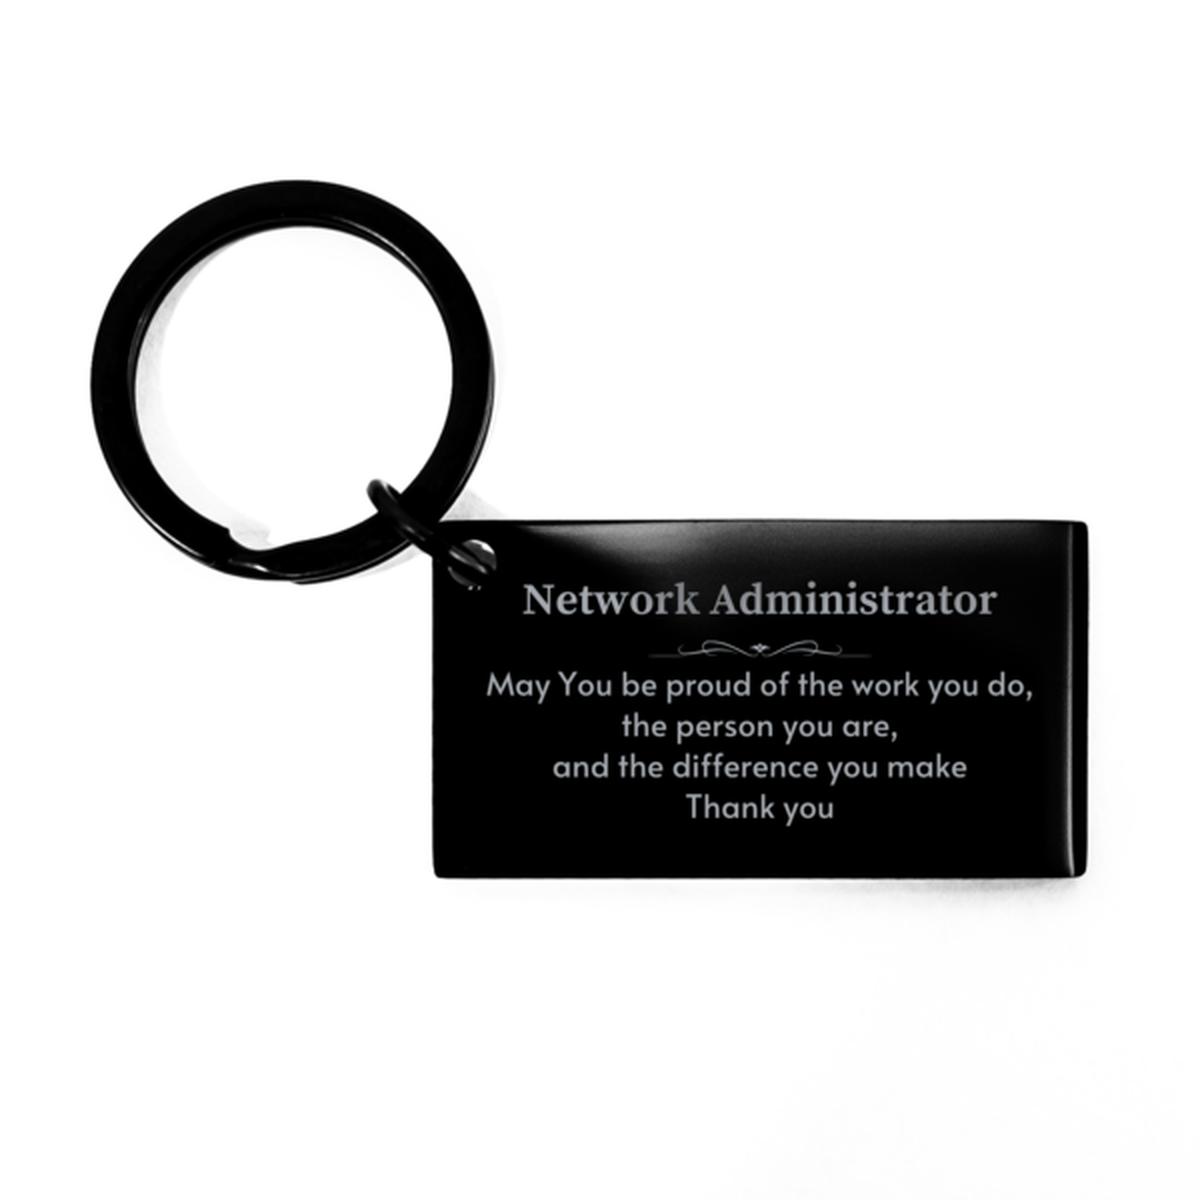 Heartwarming Keychain Retirement Coworkers Gifts for Network Administrator, PE Teacher May You be proud of the work you do, the person you are Gifts for Boss Men Women Friends